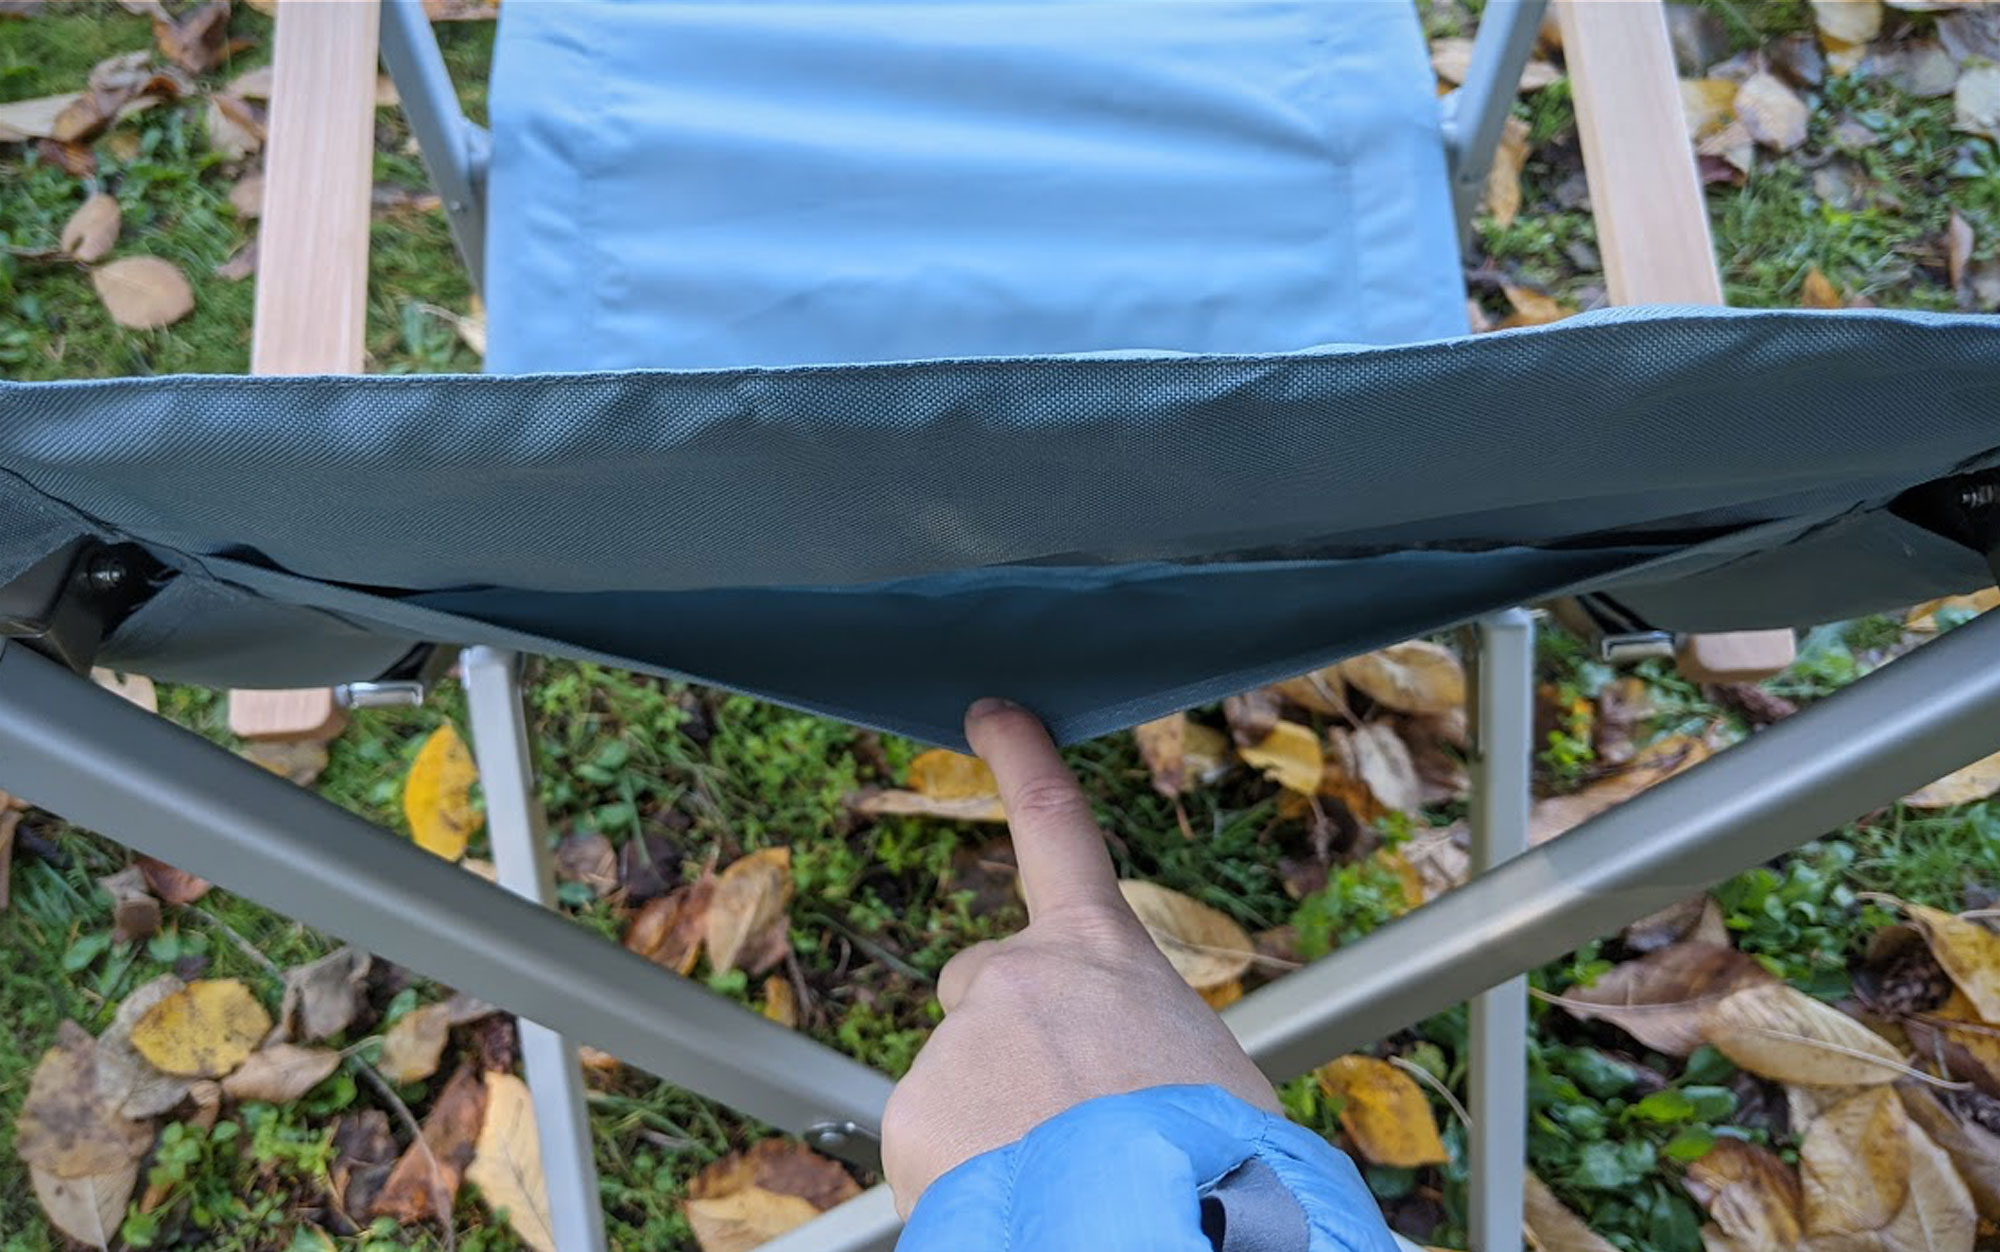 We tried all of the features of the Dometic Go camp chair.